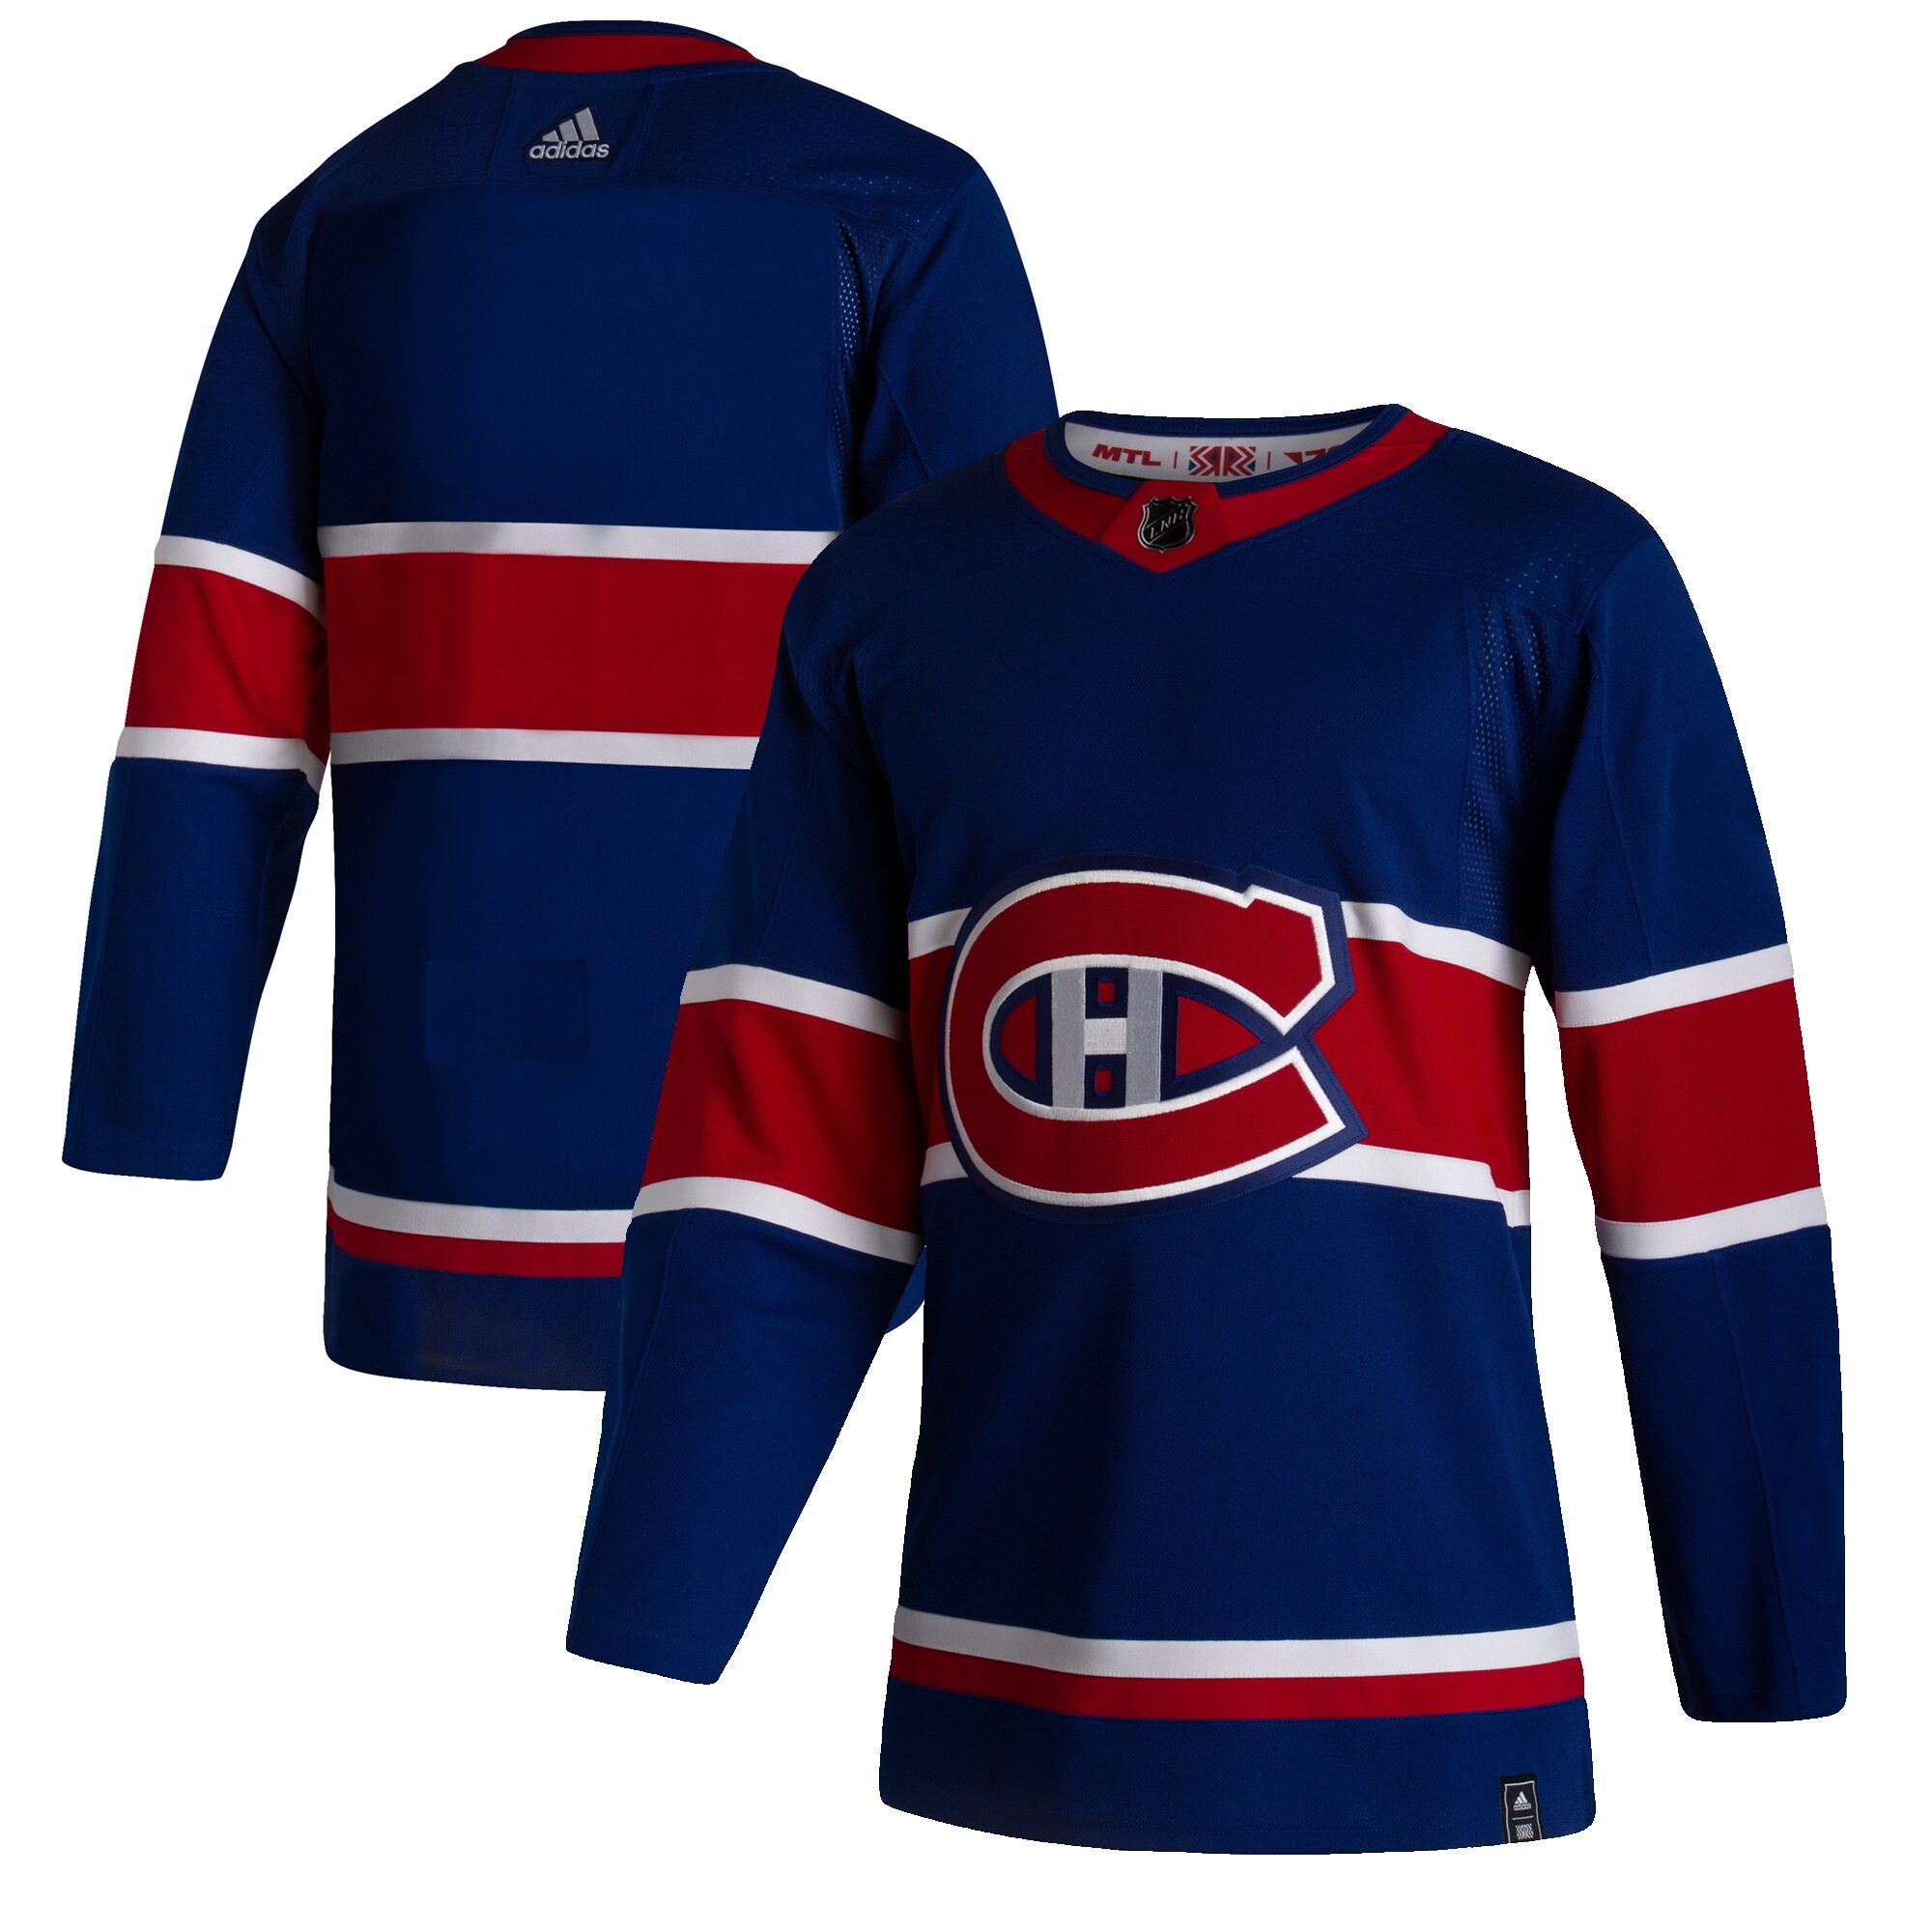 Montreal Candiens fans need to check out these new ‘Reverse Retro’ jerseys